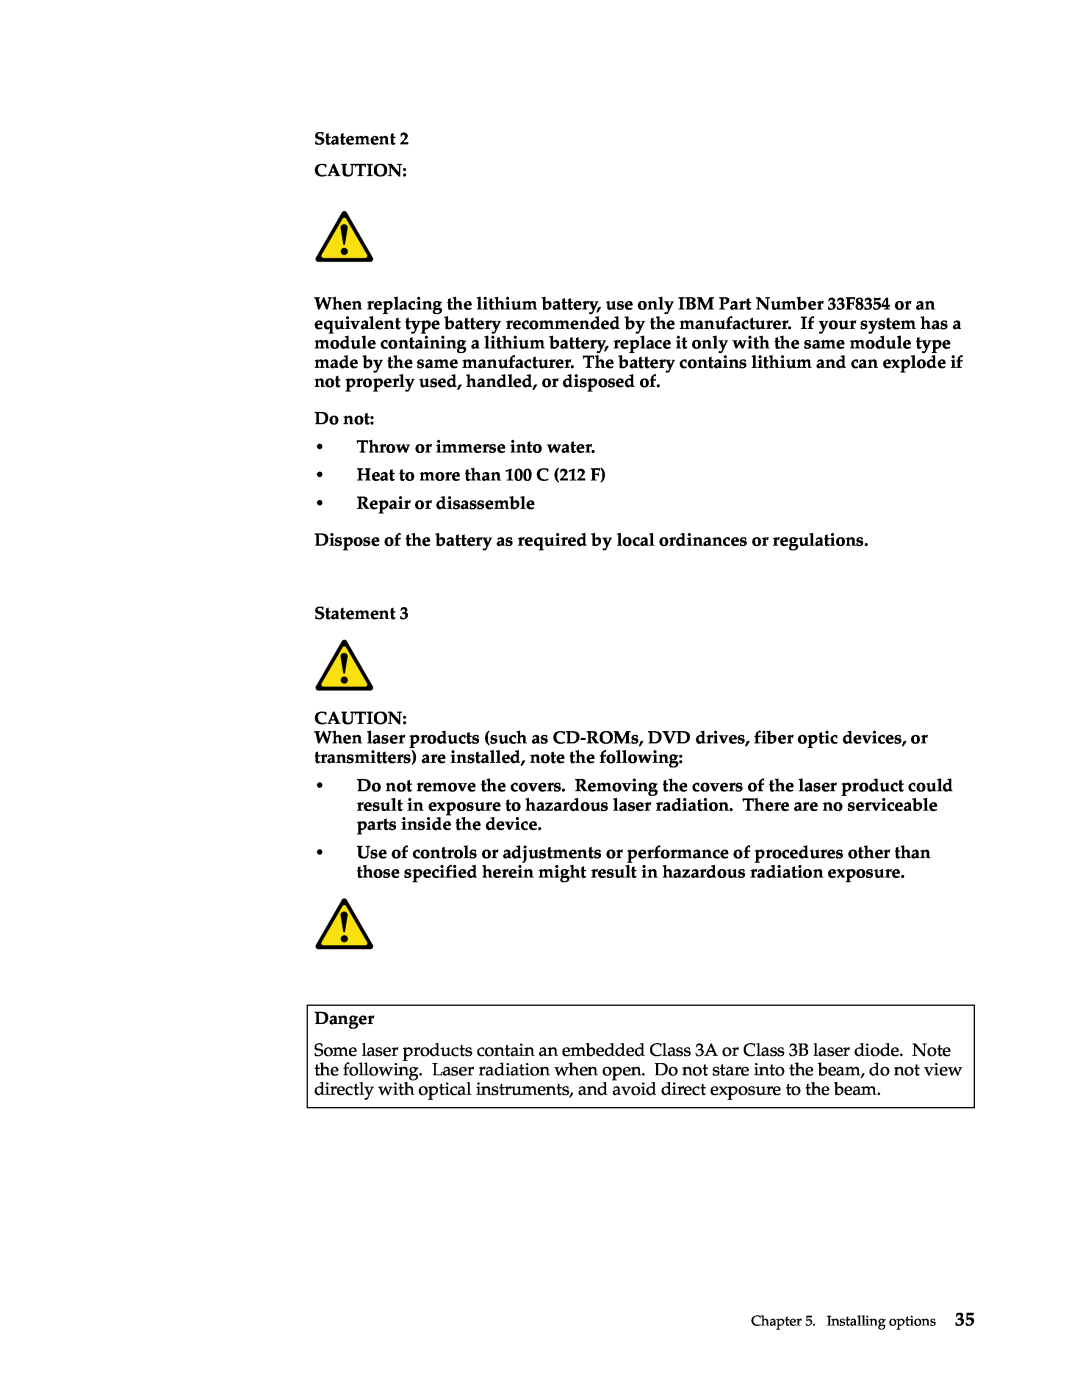 IBM 220 manual Statement, Do not Throw or immerse into water Heat to more than 100 C 212 F, Repair or disassemble, Danger 